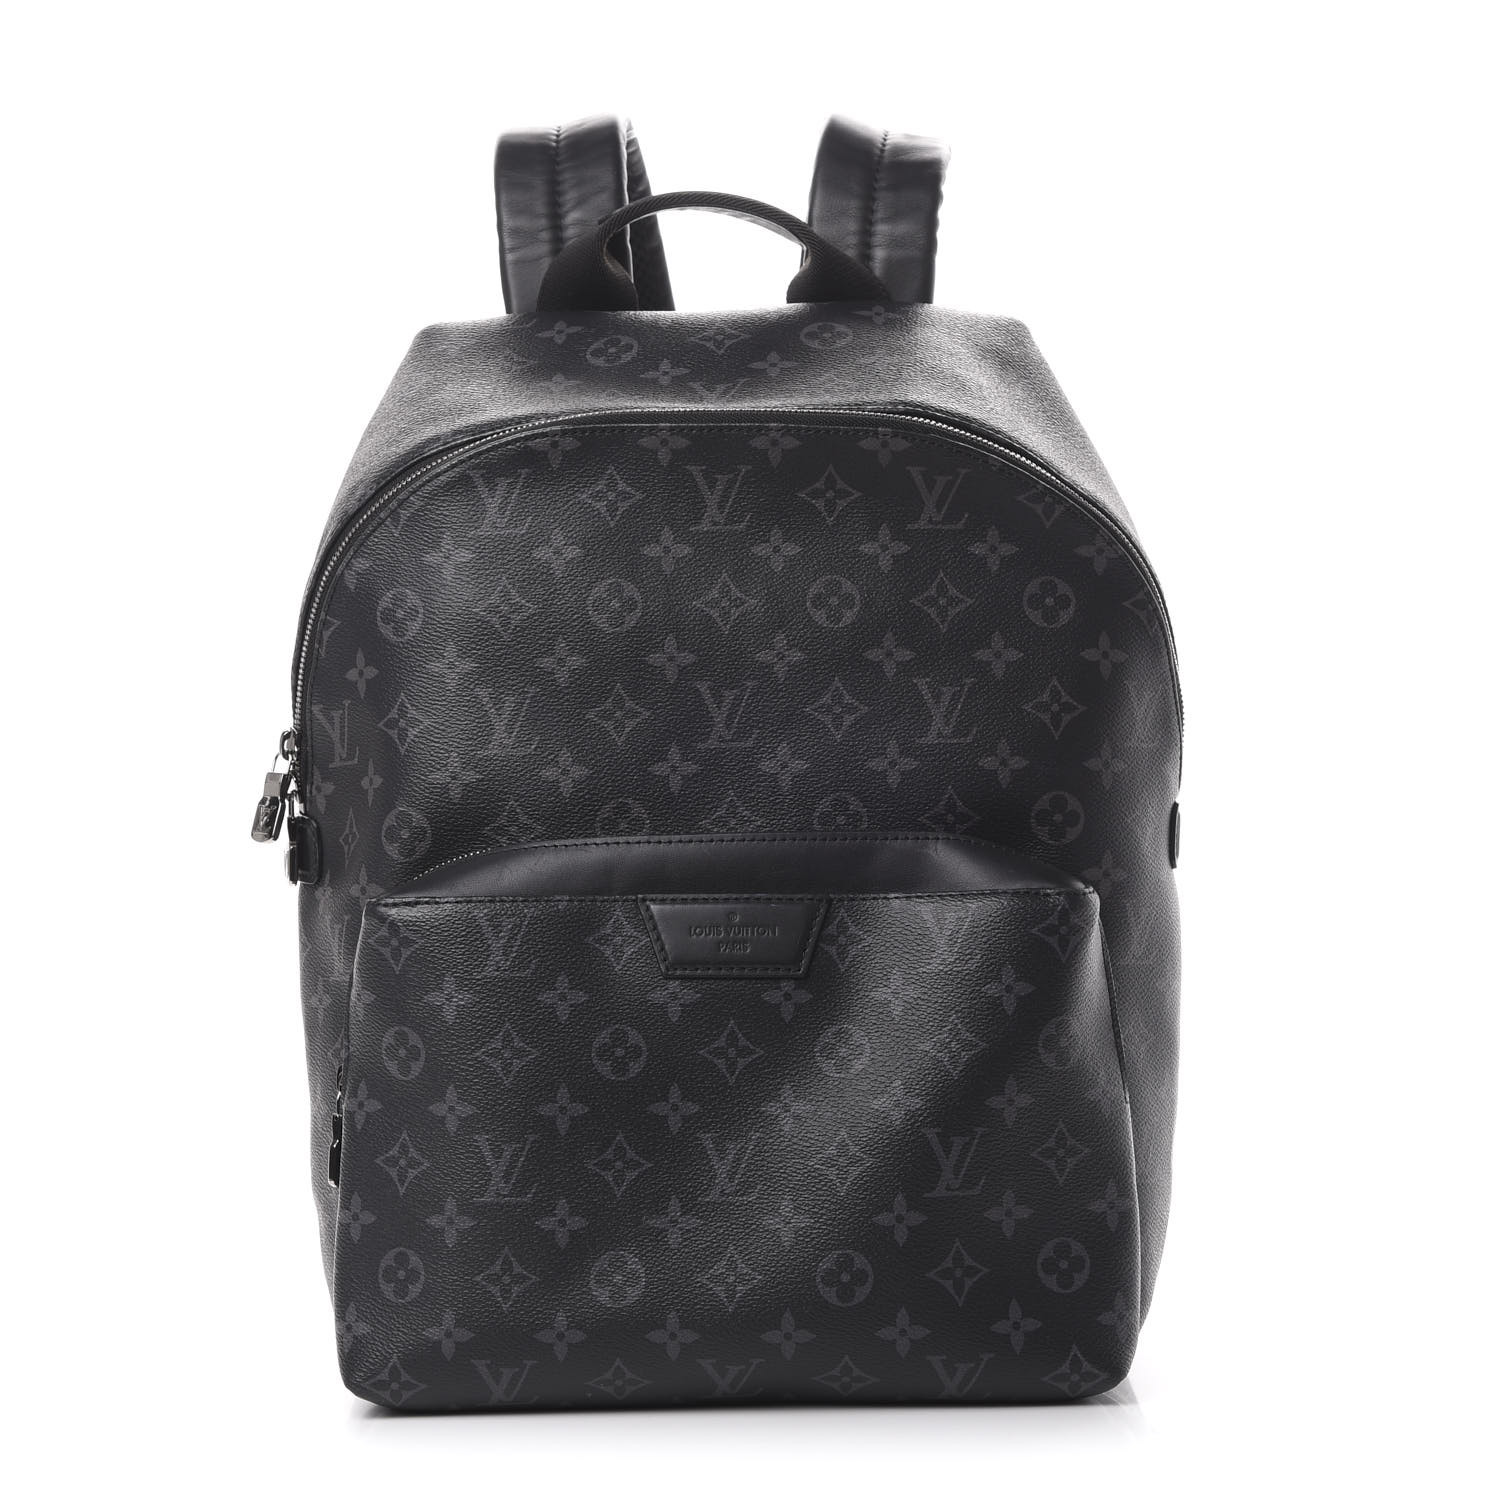 LOUIS VUITTON Monogram Eclipse Discovery Backpack PM 590429 | FASHIONPHILE